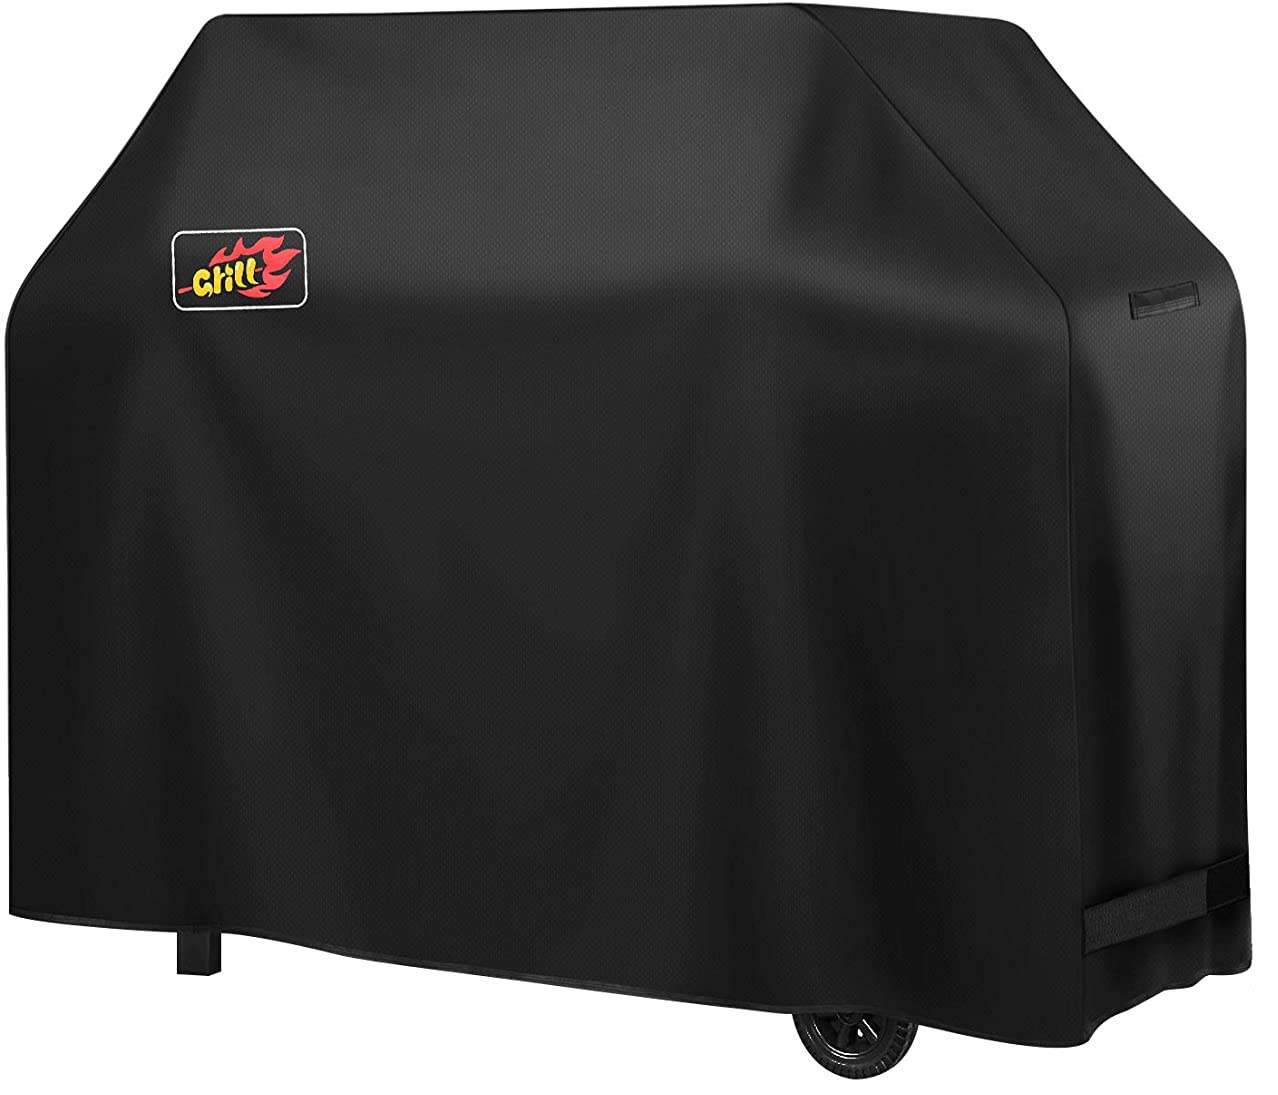 The best overall grill cover: Homitt 58-inch 600D